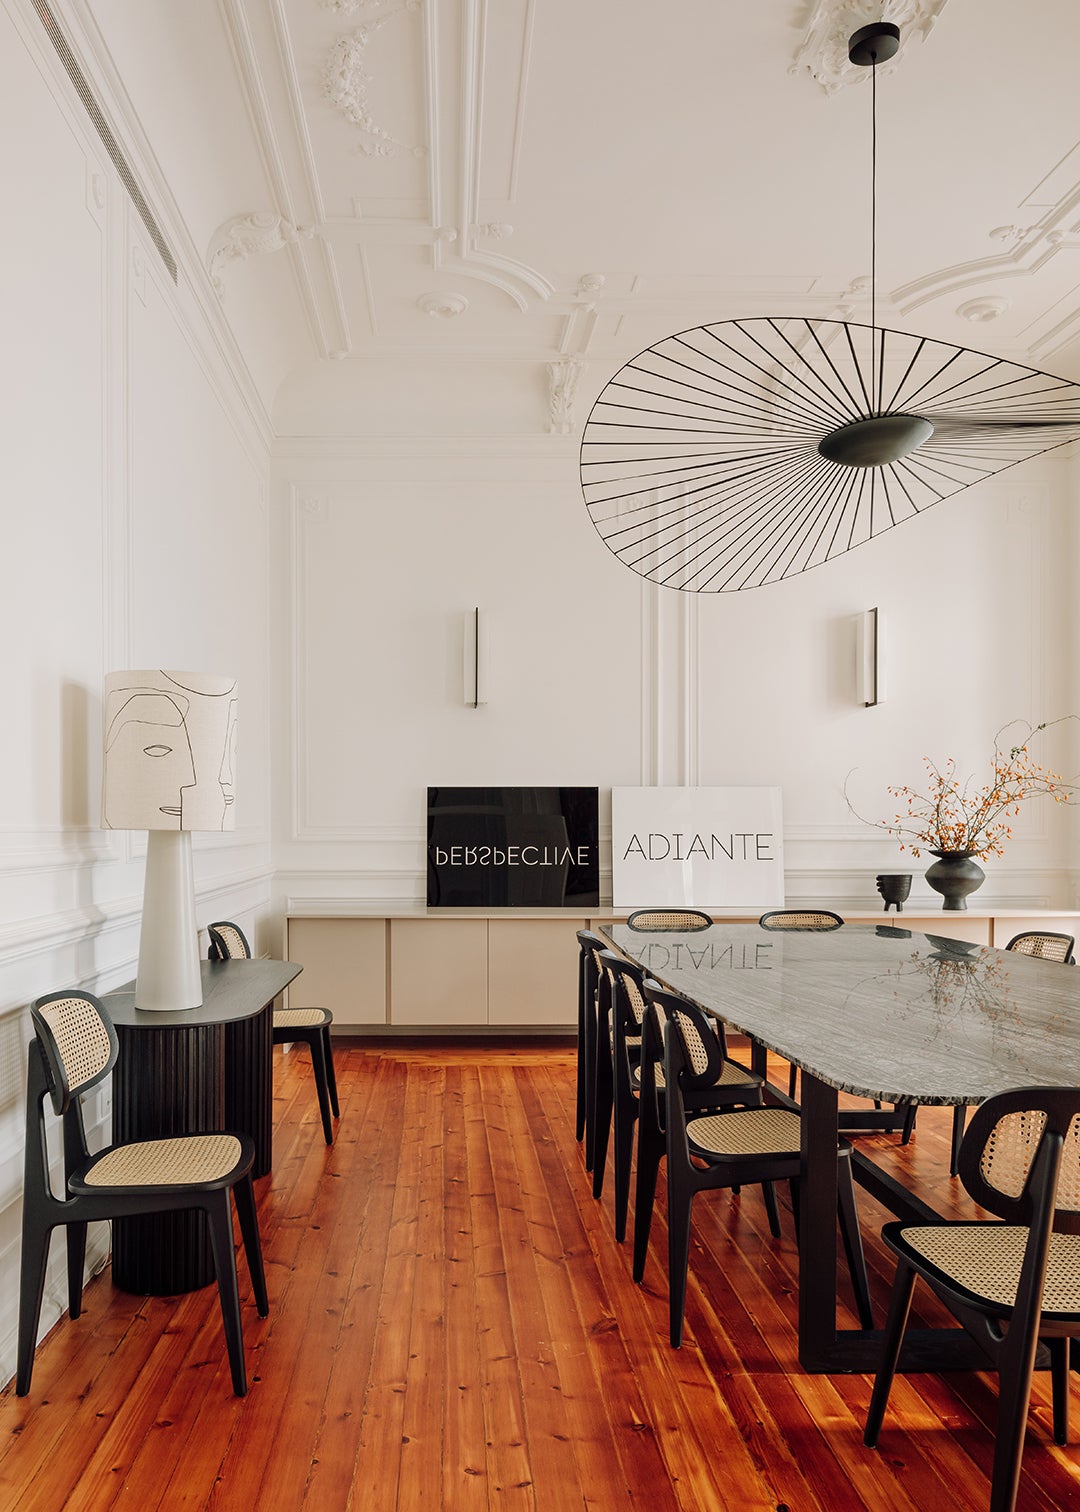 The Stone Slab in This Lisbon Apartment’s Dining Room Arrived Via Sailboat From France